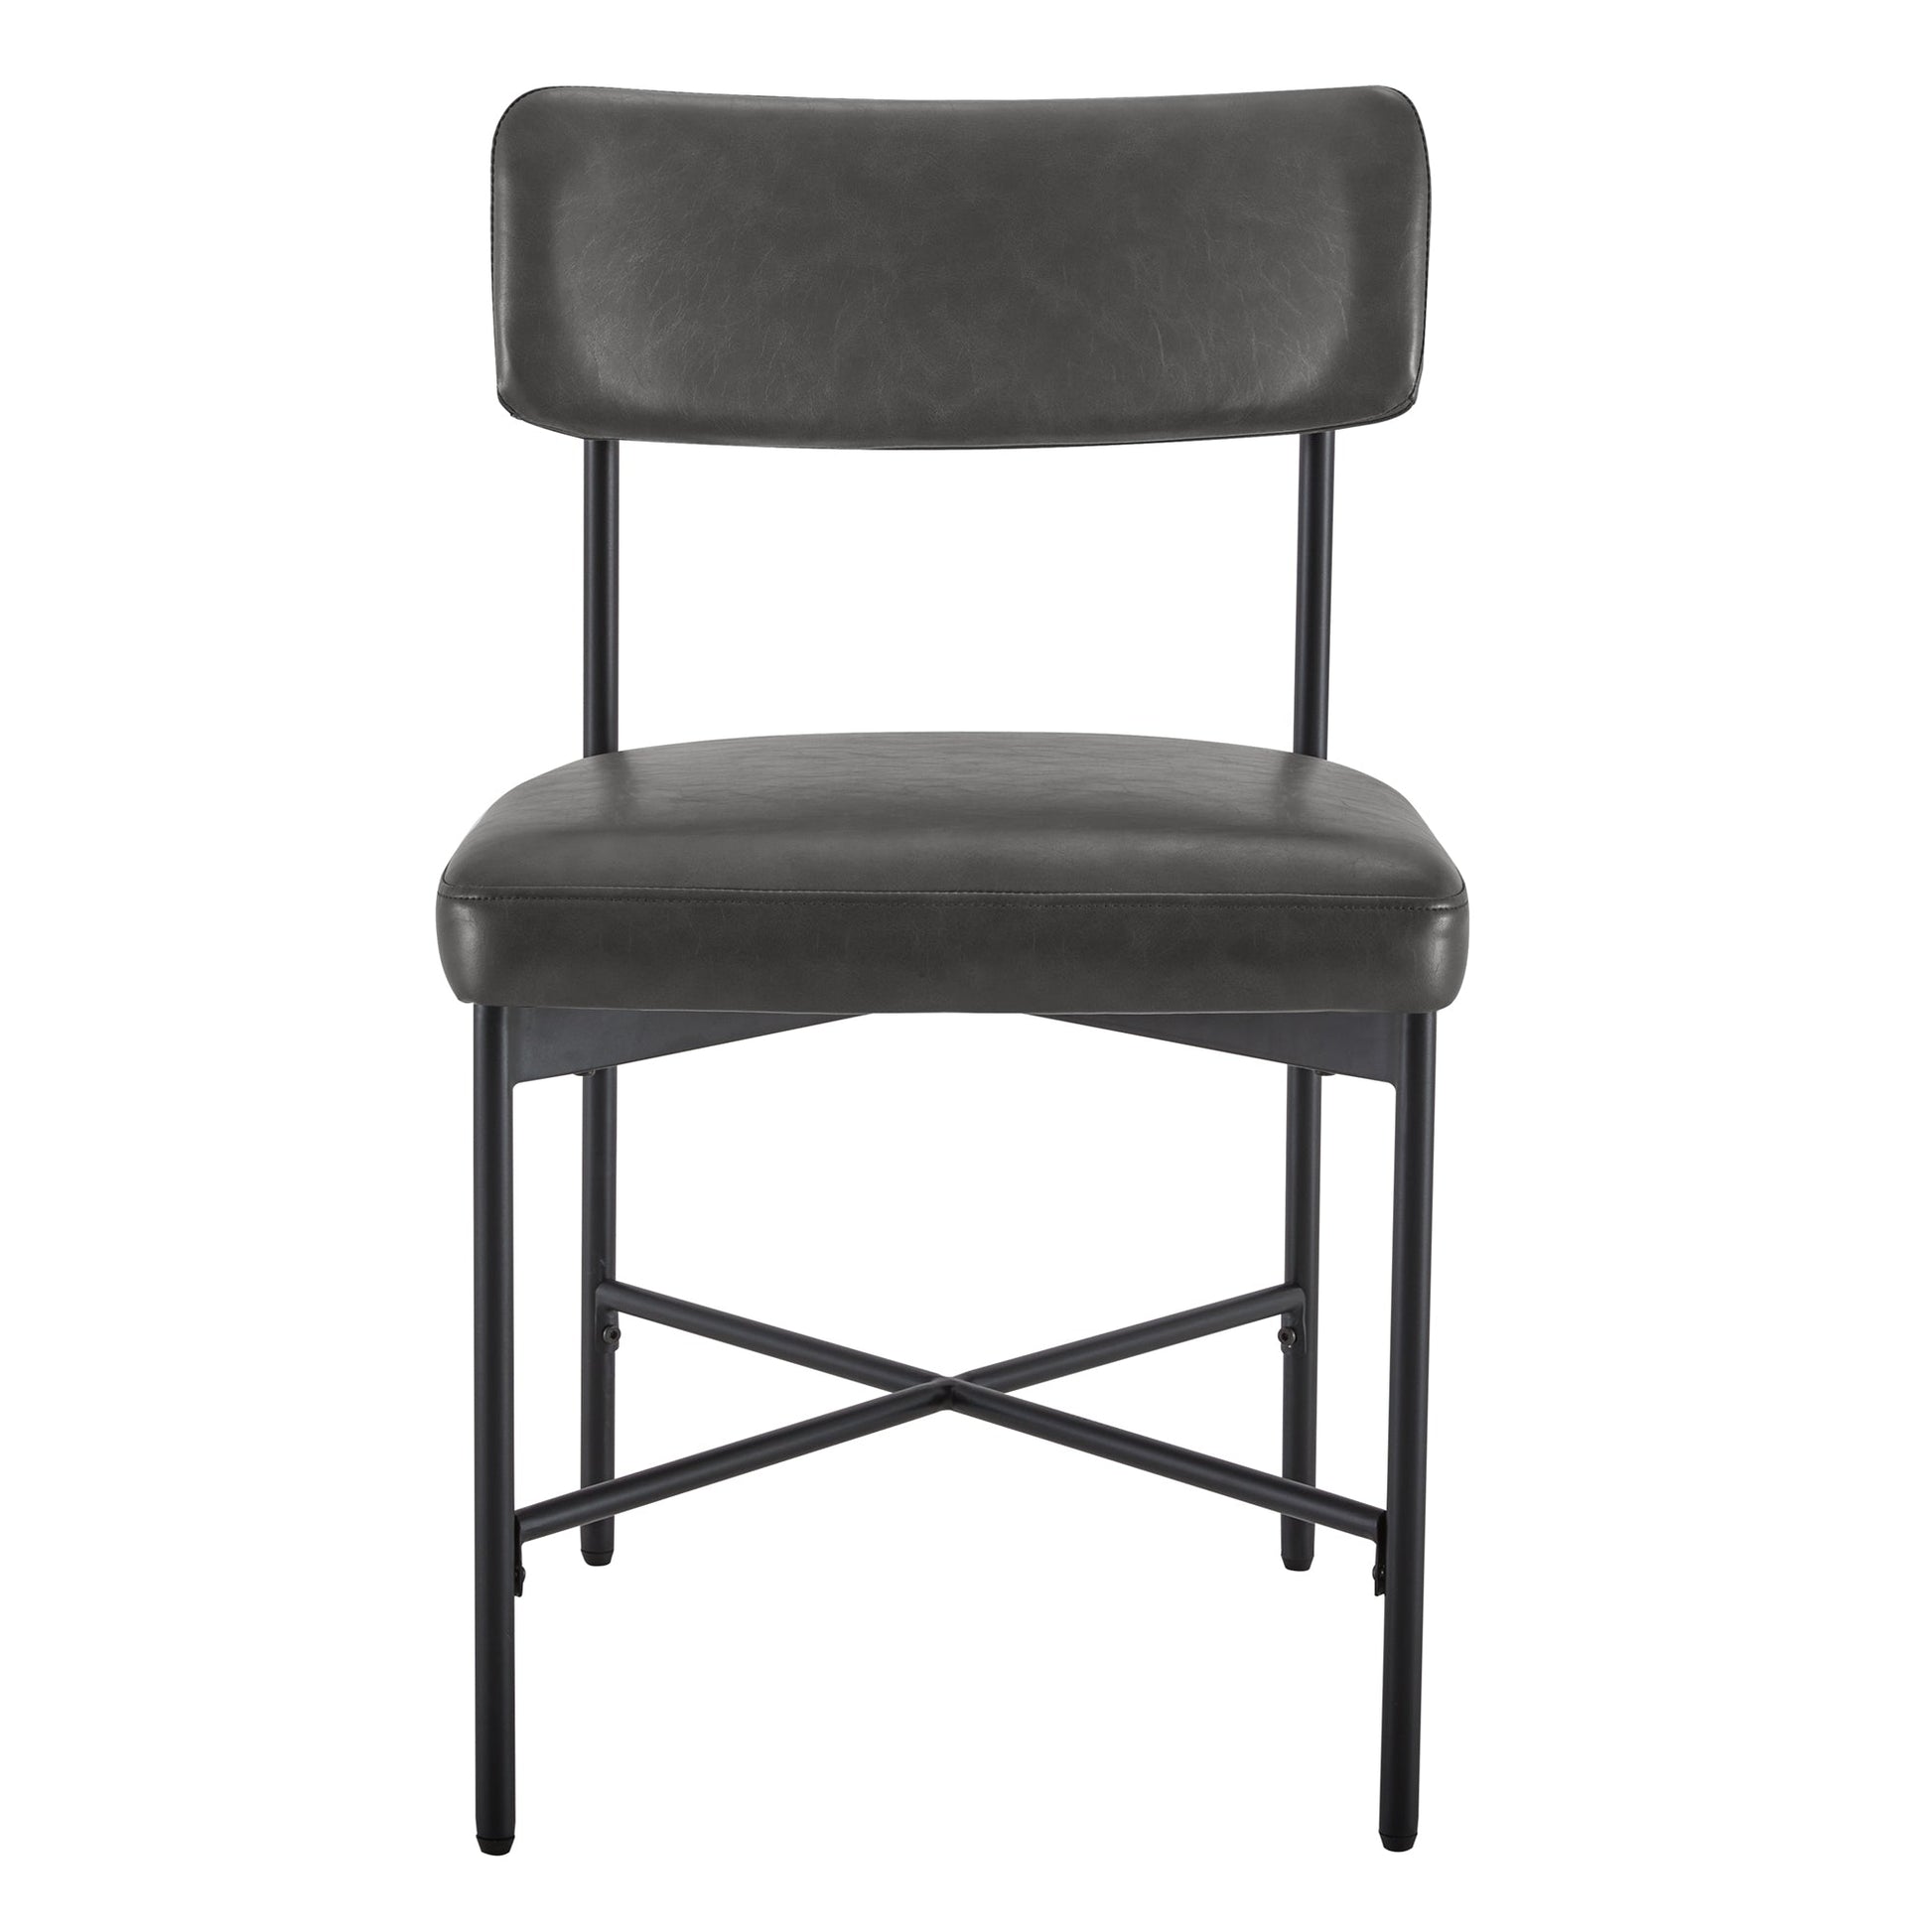 CHITA LIVING-Lovy Dining Chair (Set of 2)-Dining Chairs-Faux Leather-Grey-